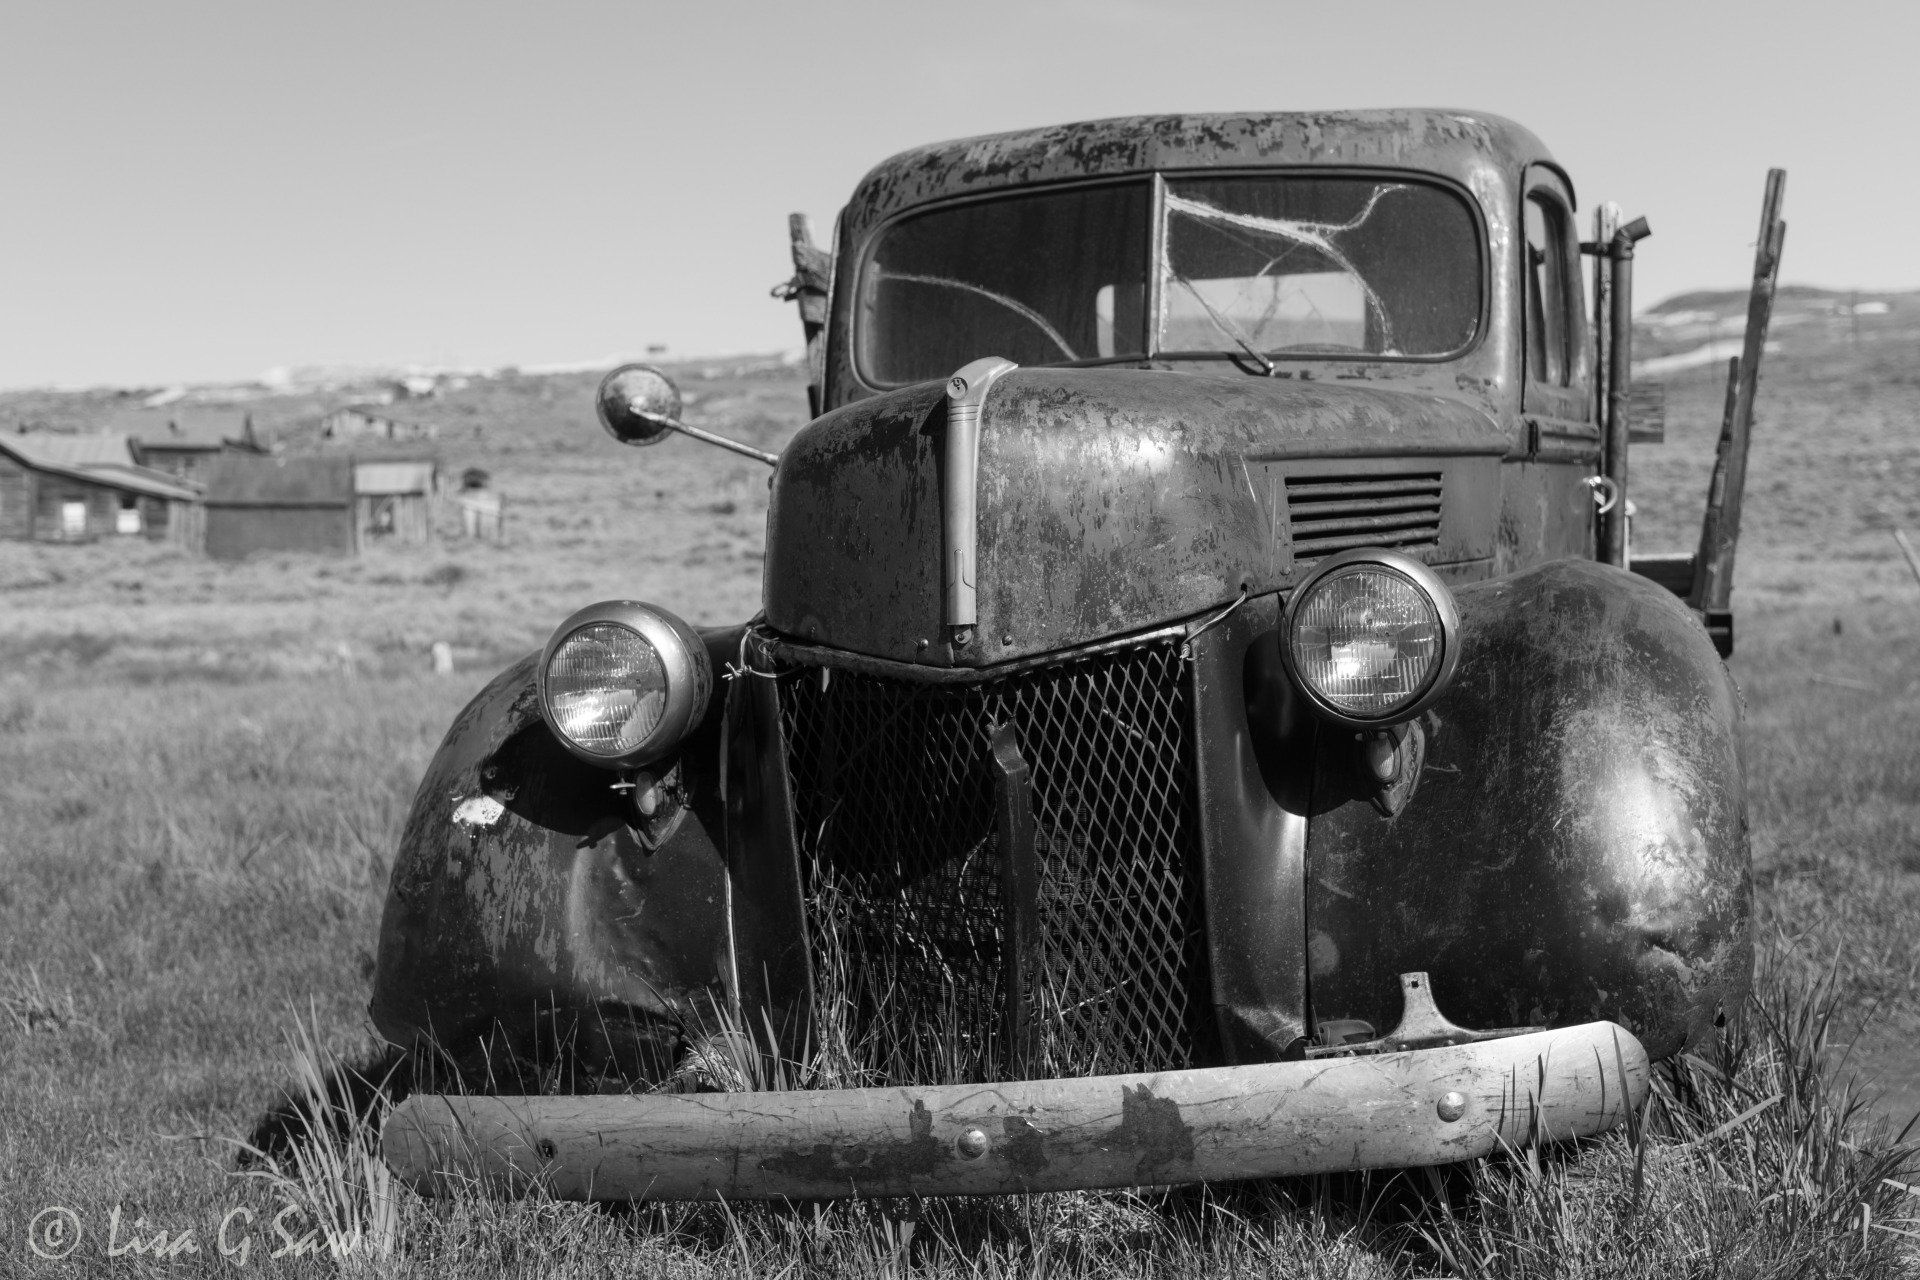 Abandoned pick up truck in ghost town, Bodie (black and white) (black and white)